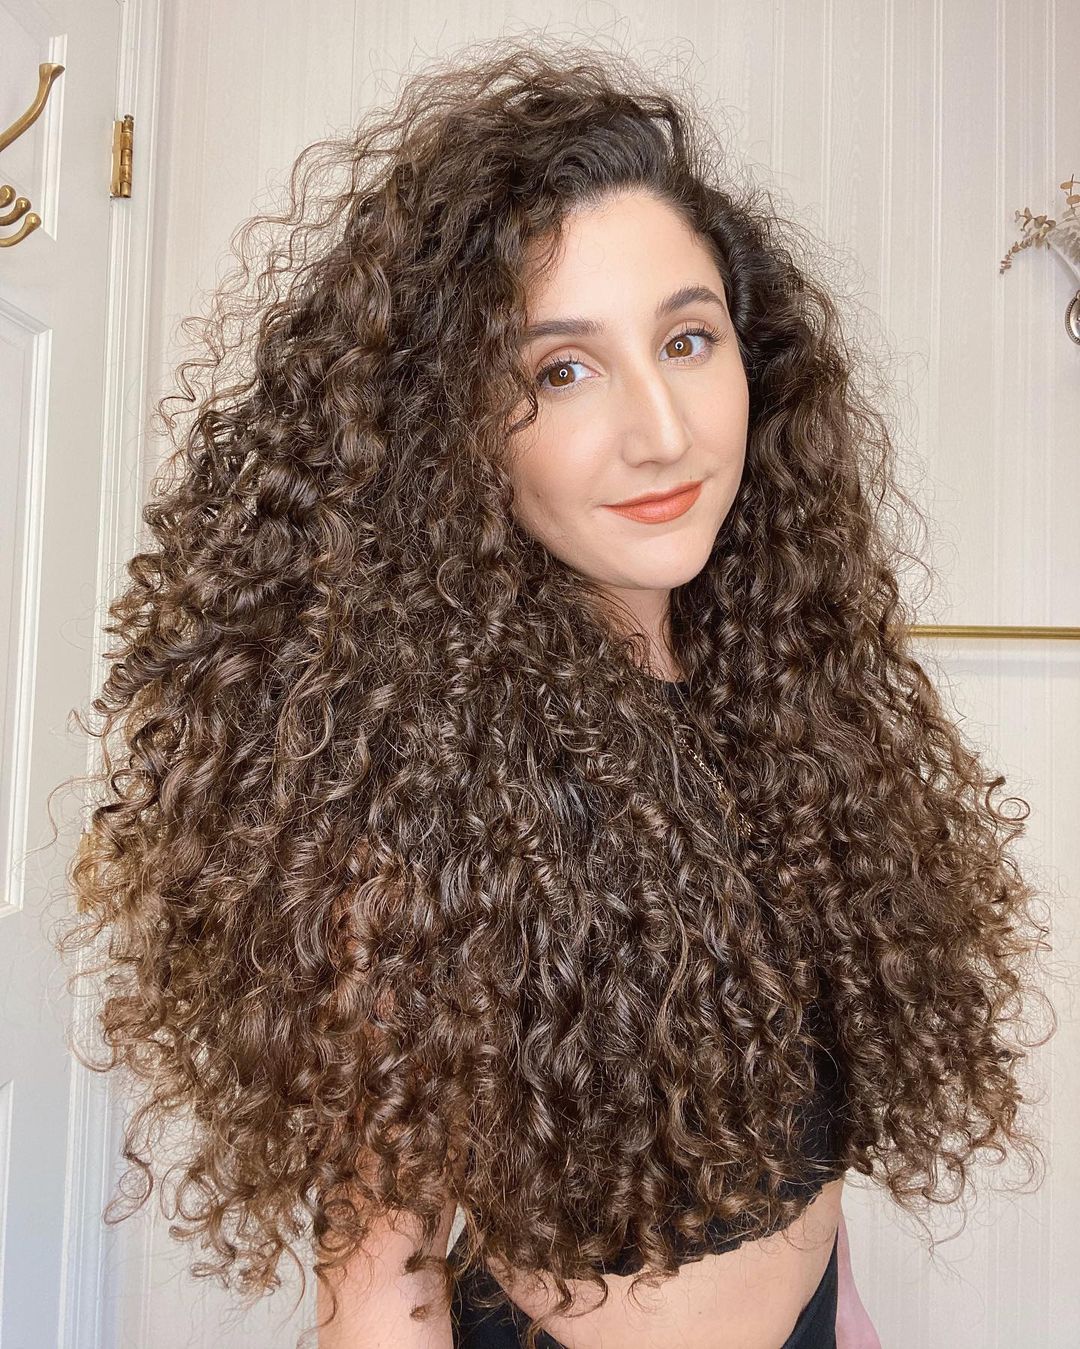 Curly Hair Styled with Leave-In Conditioner Oil and Gel